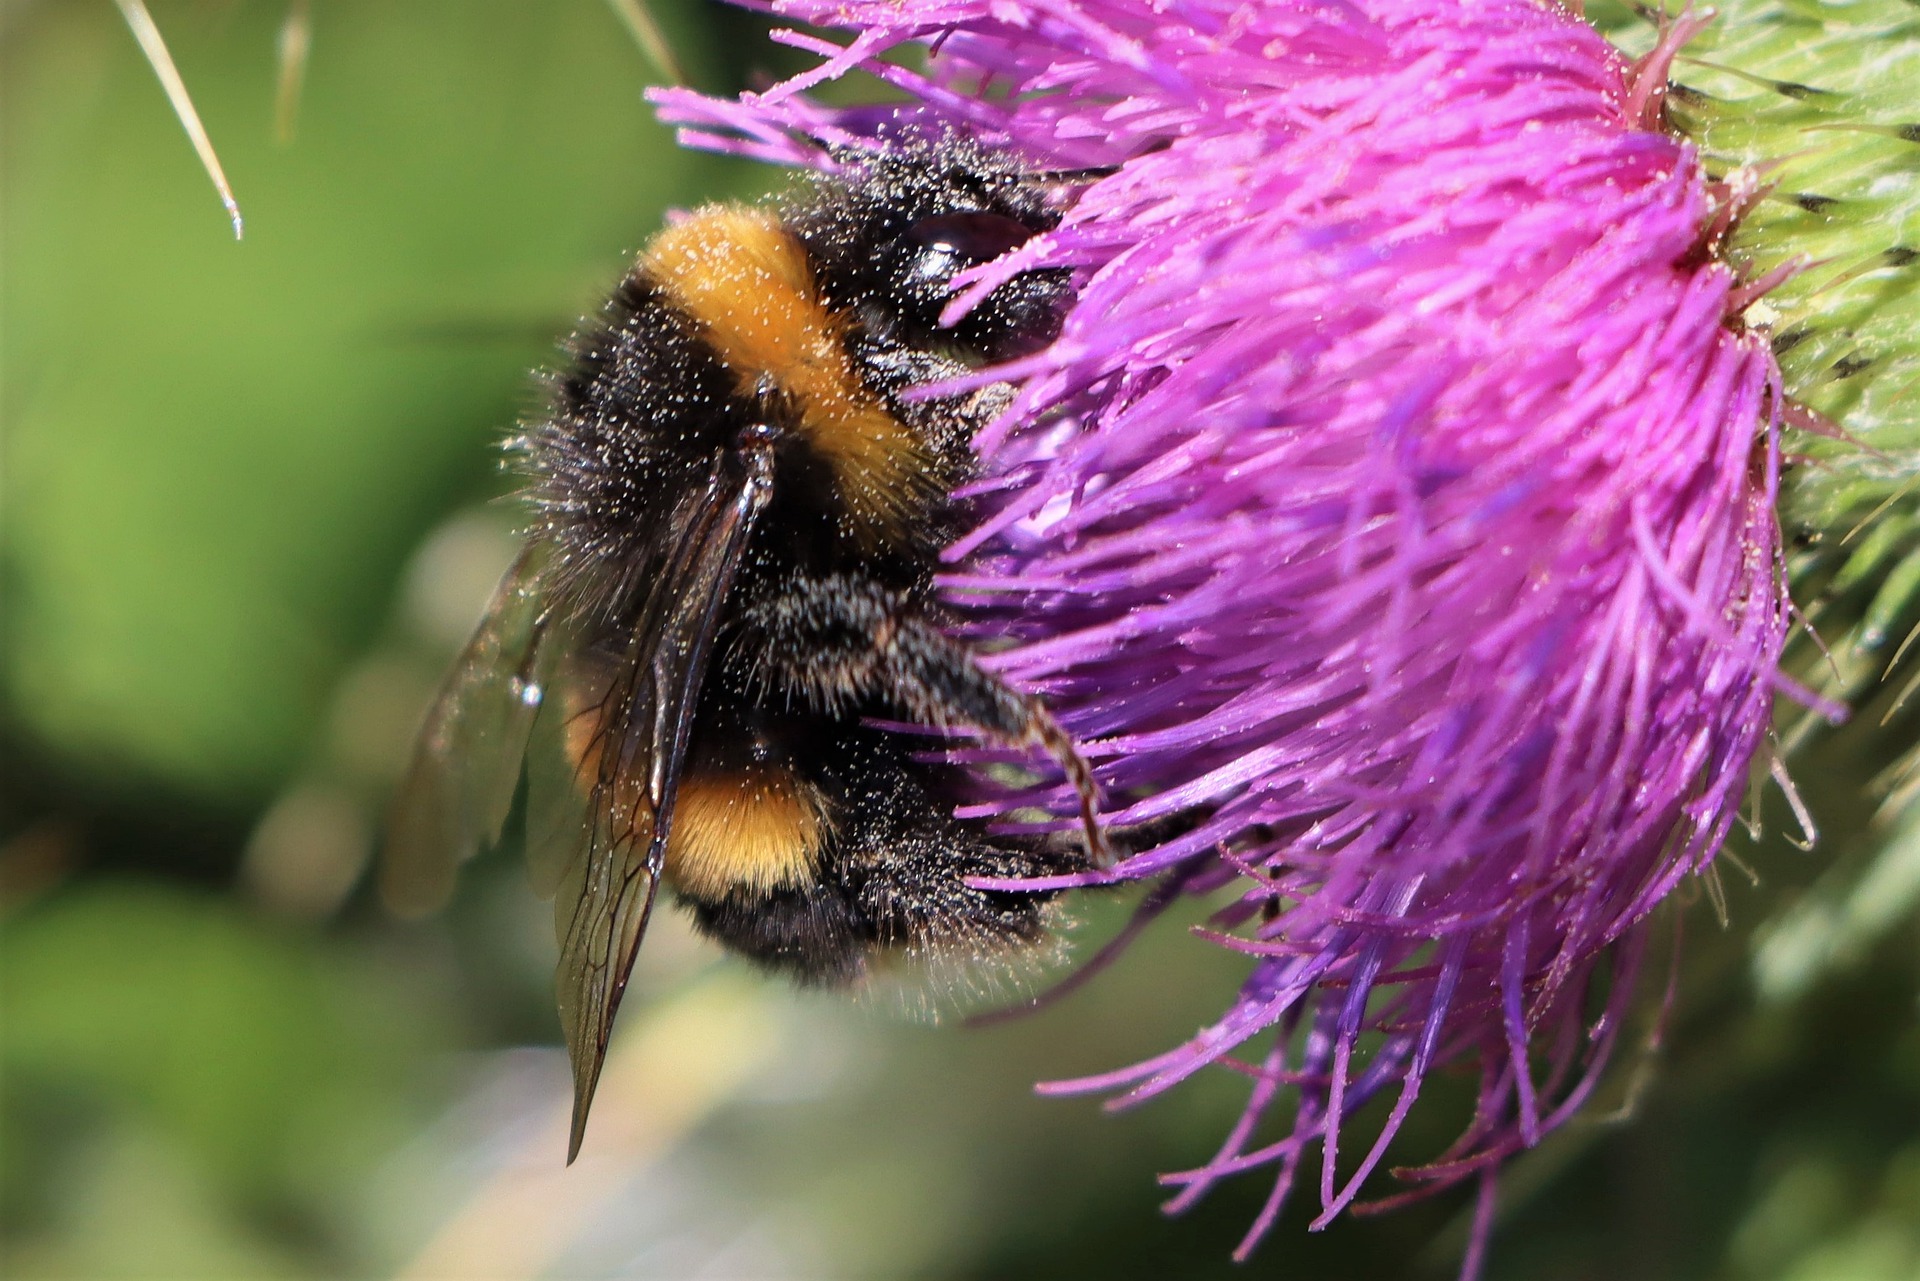 Bumblebee pollinating a thistle.